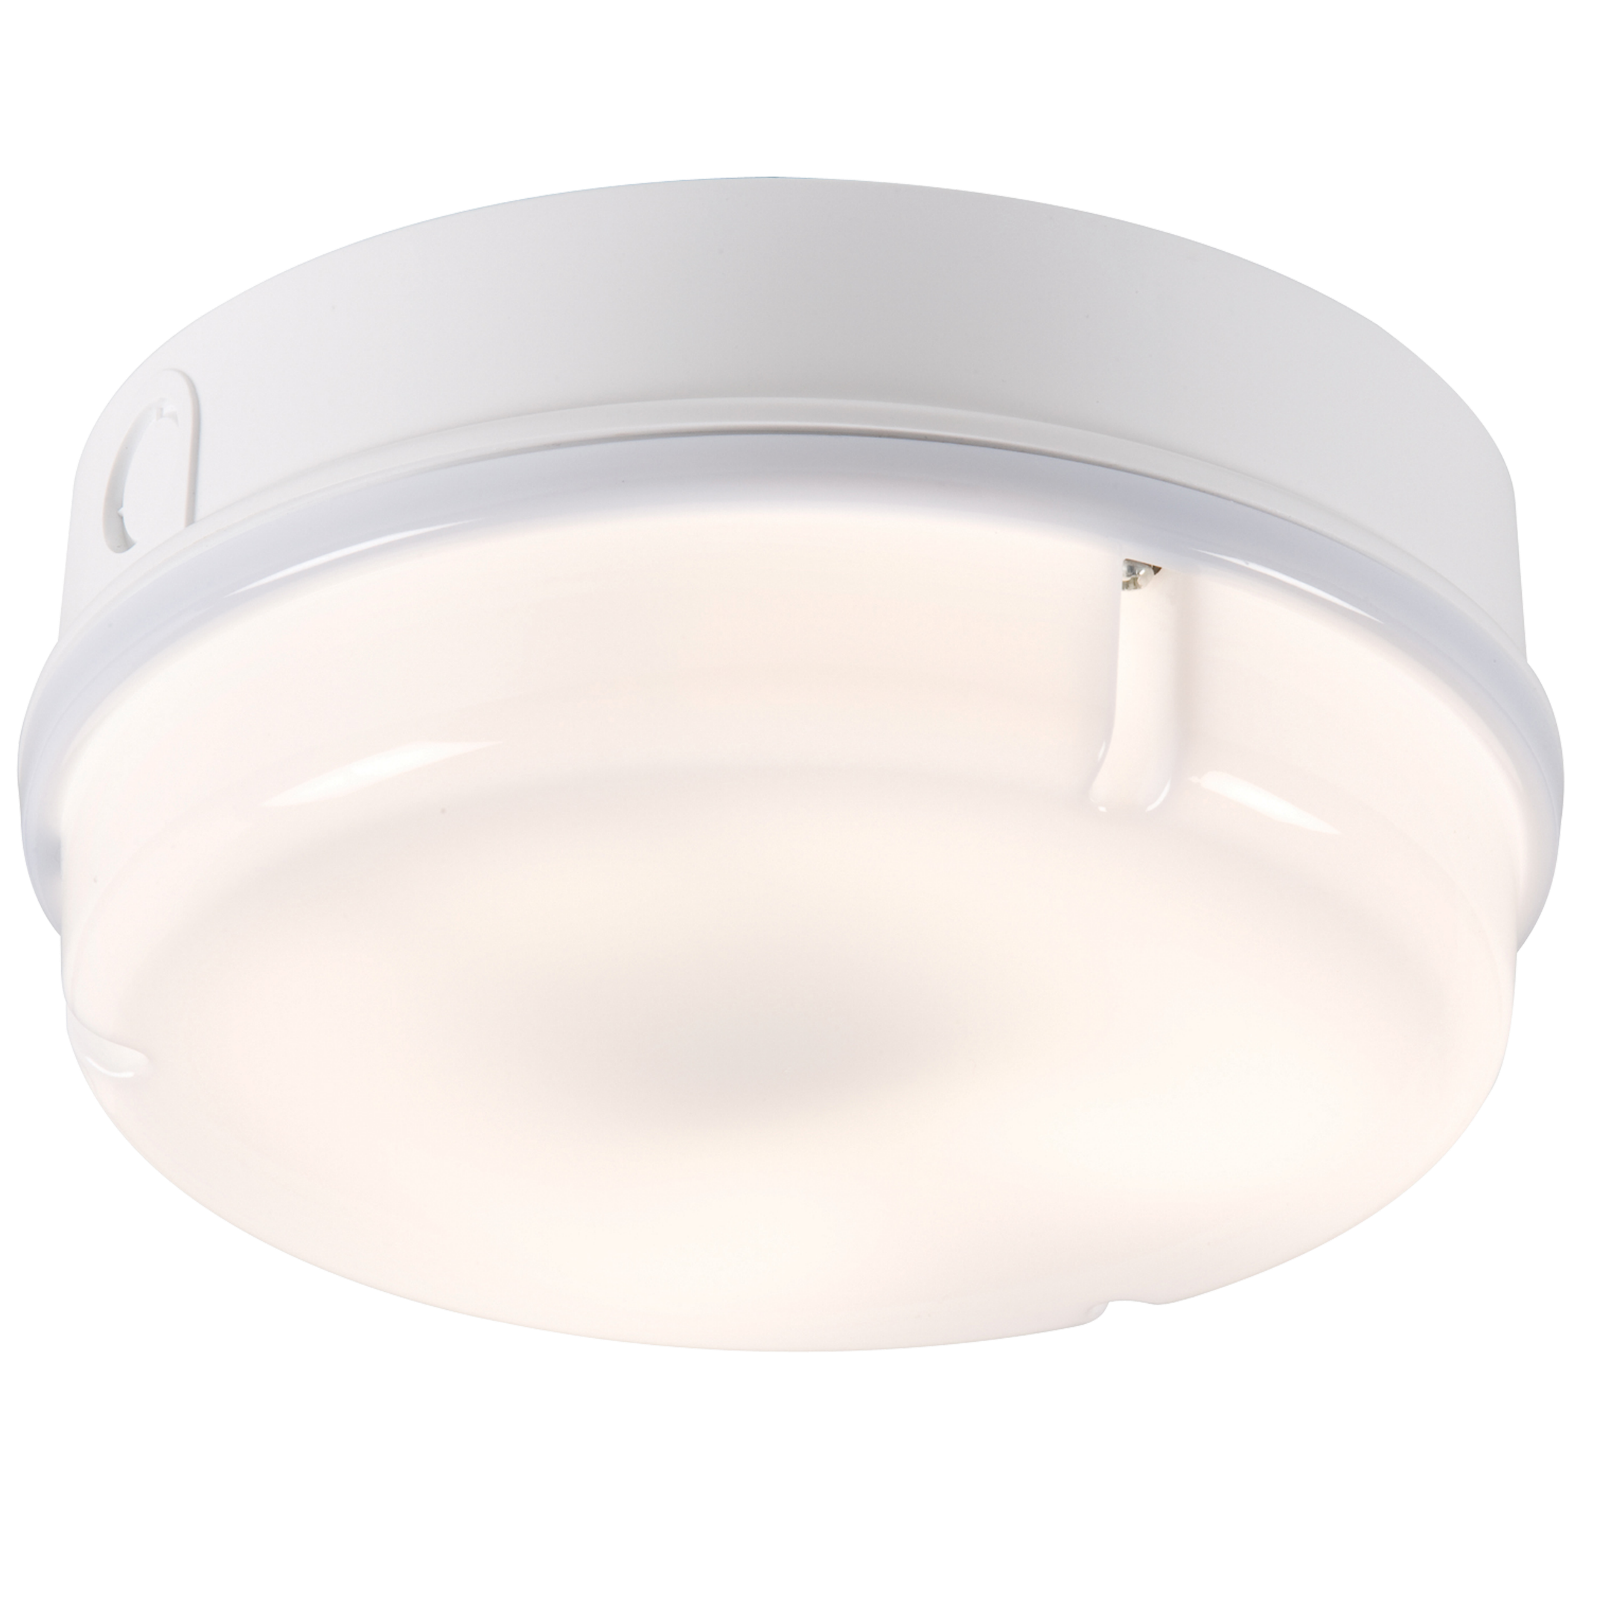 IP65 28W HF Round Emergency Bulkhead With Opal Diffuser And White Base - TPR28WOEMHF 